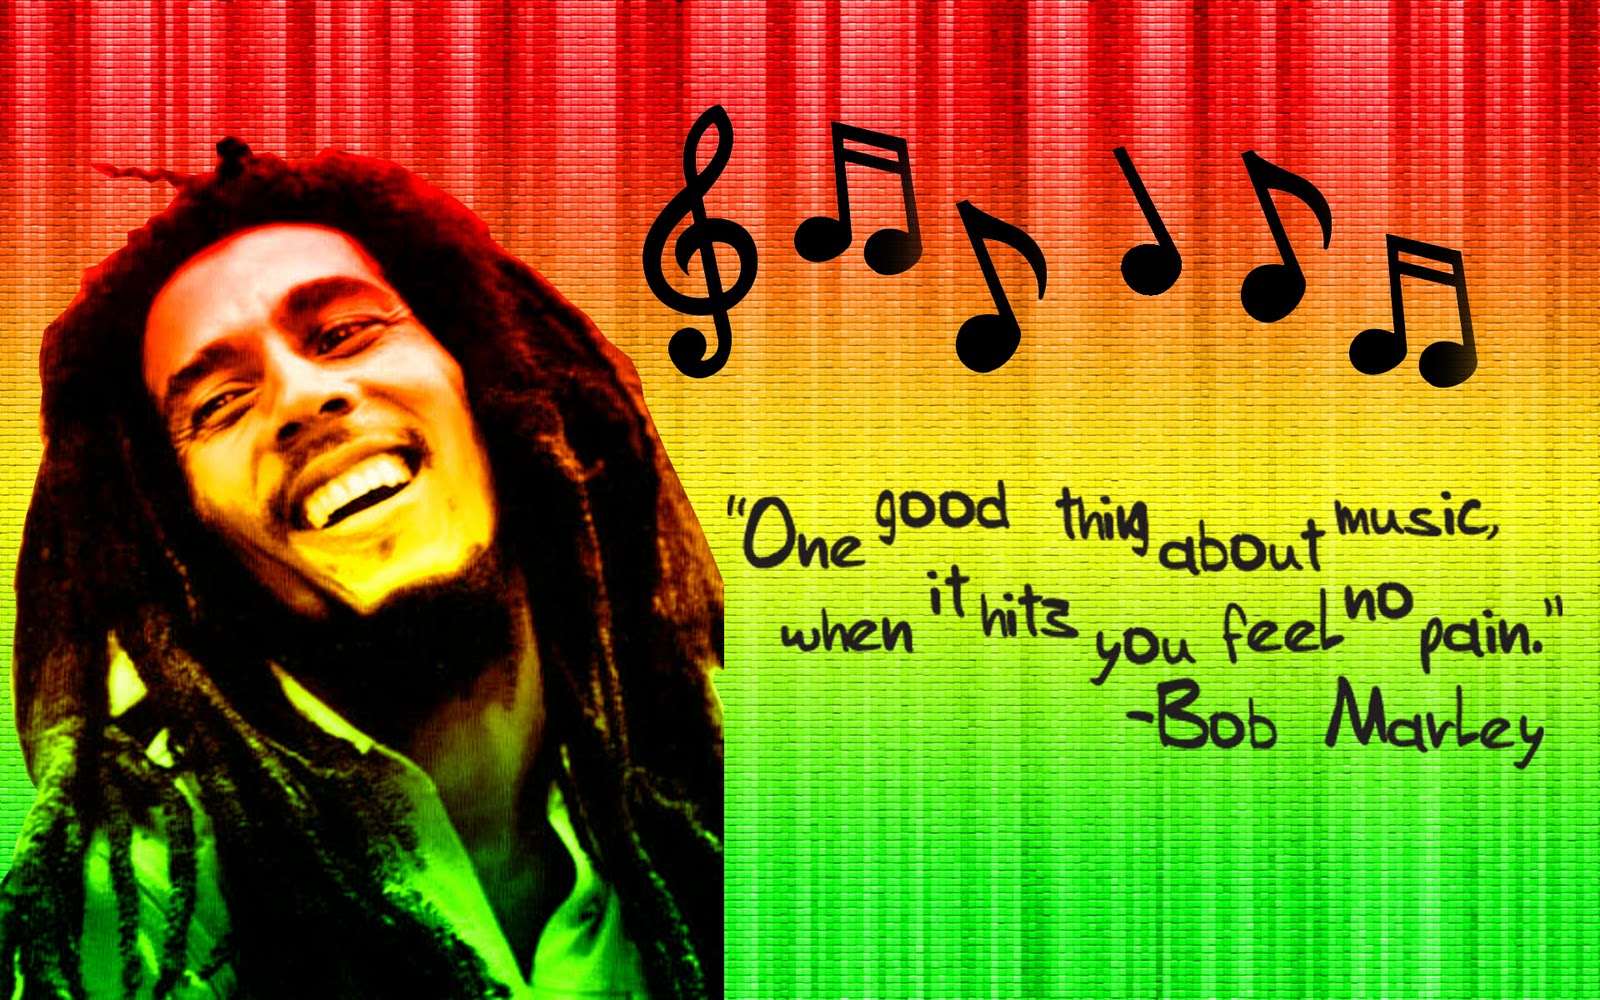 Bob Marley Quotes | I Love You-Picture And Quotes1600 x 1000